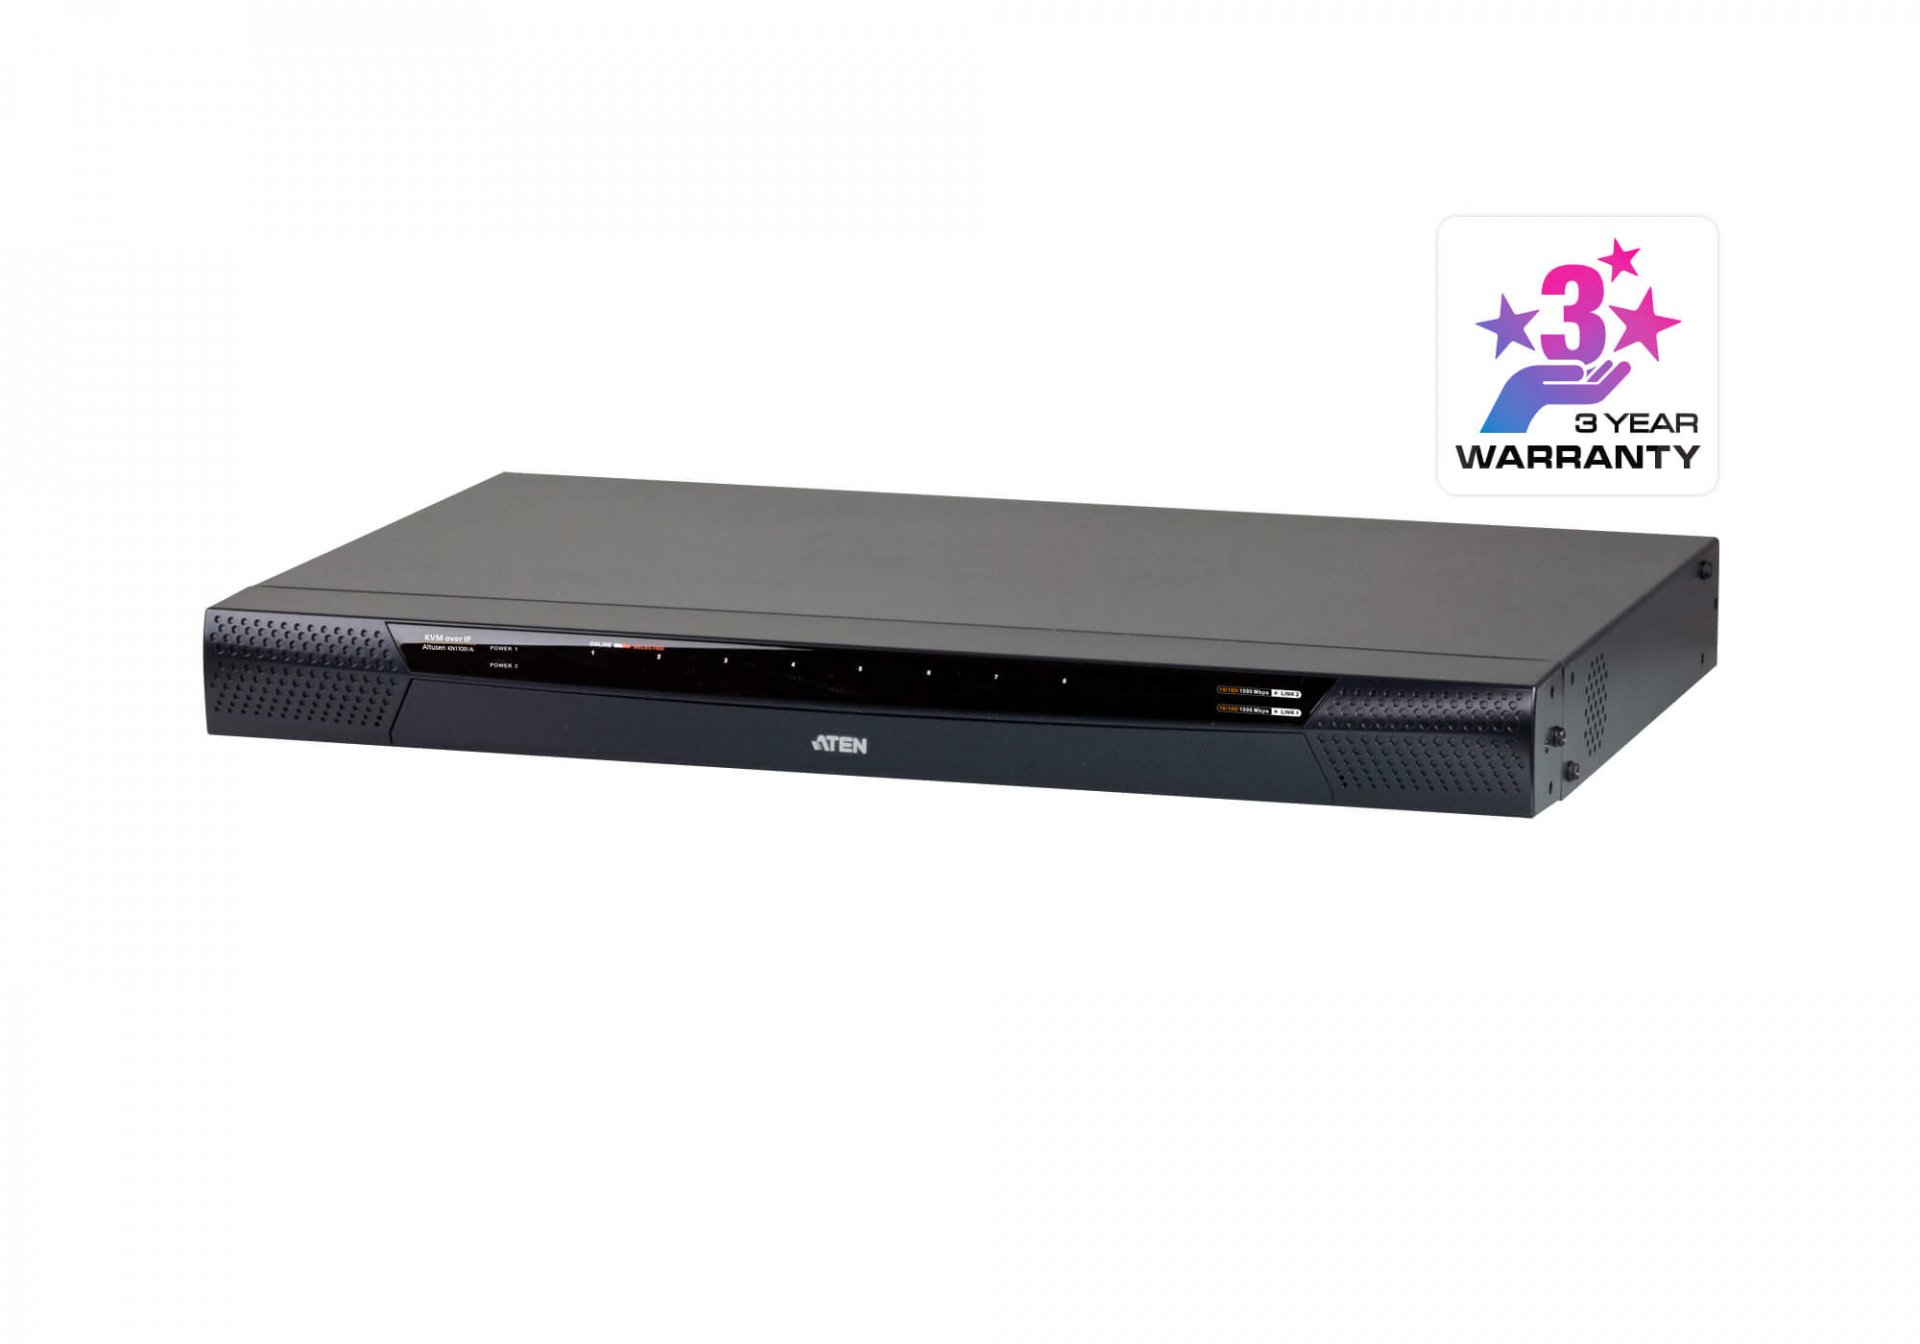 KN1108VA : 1-Local/1-Remote Access 8-Port Cat 5 KVM over IP Switch with Virtual Media (1920 x 1200)